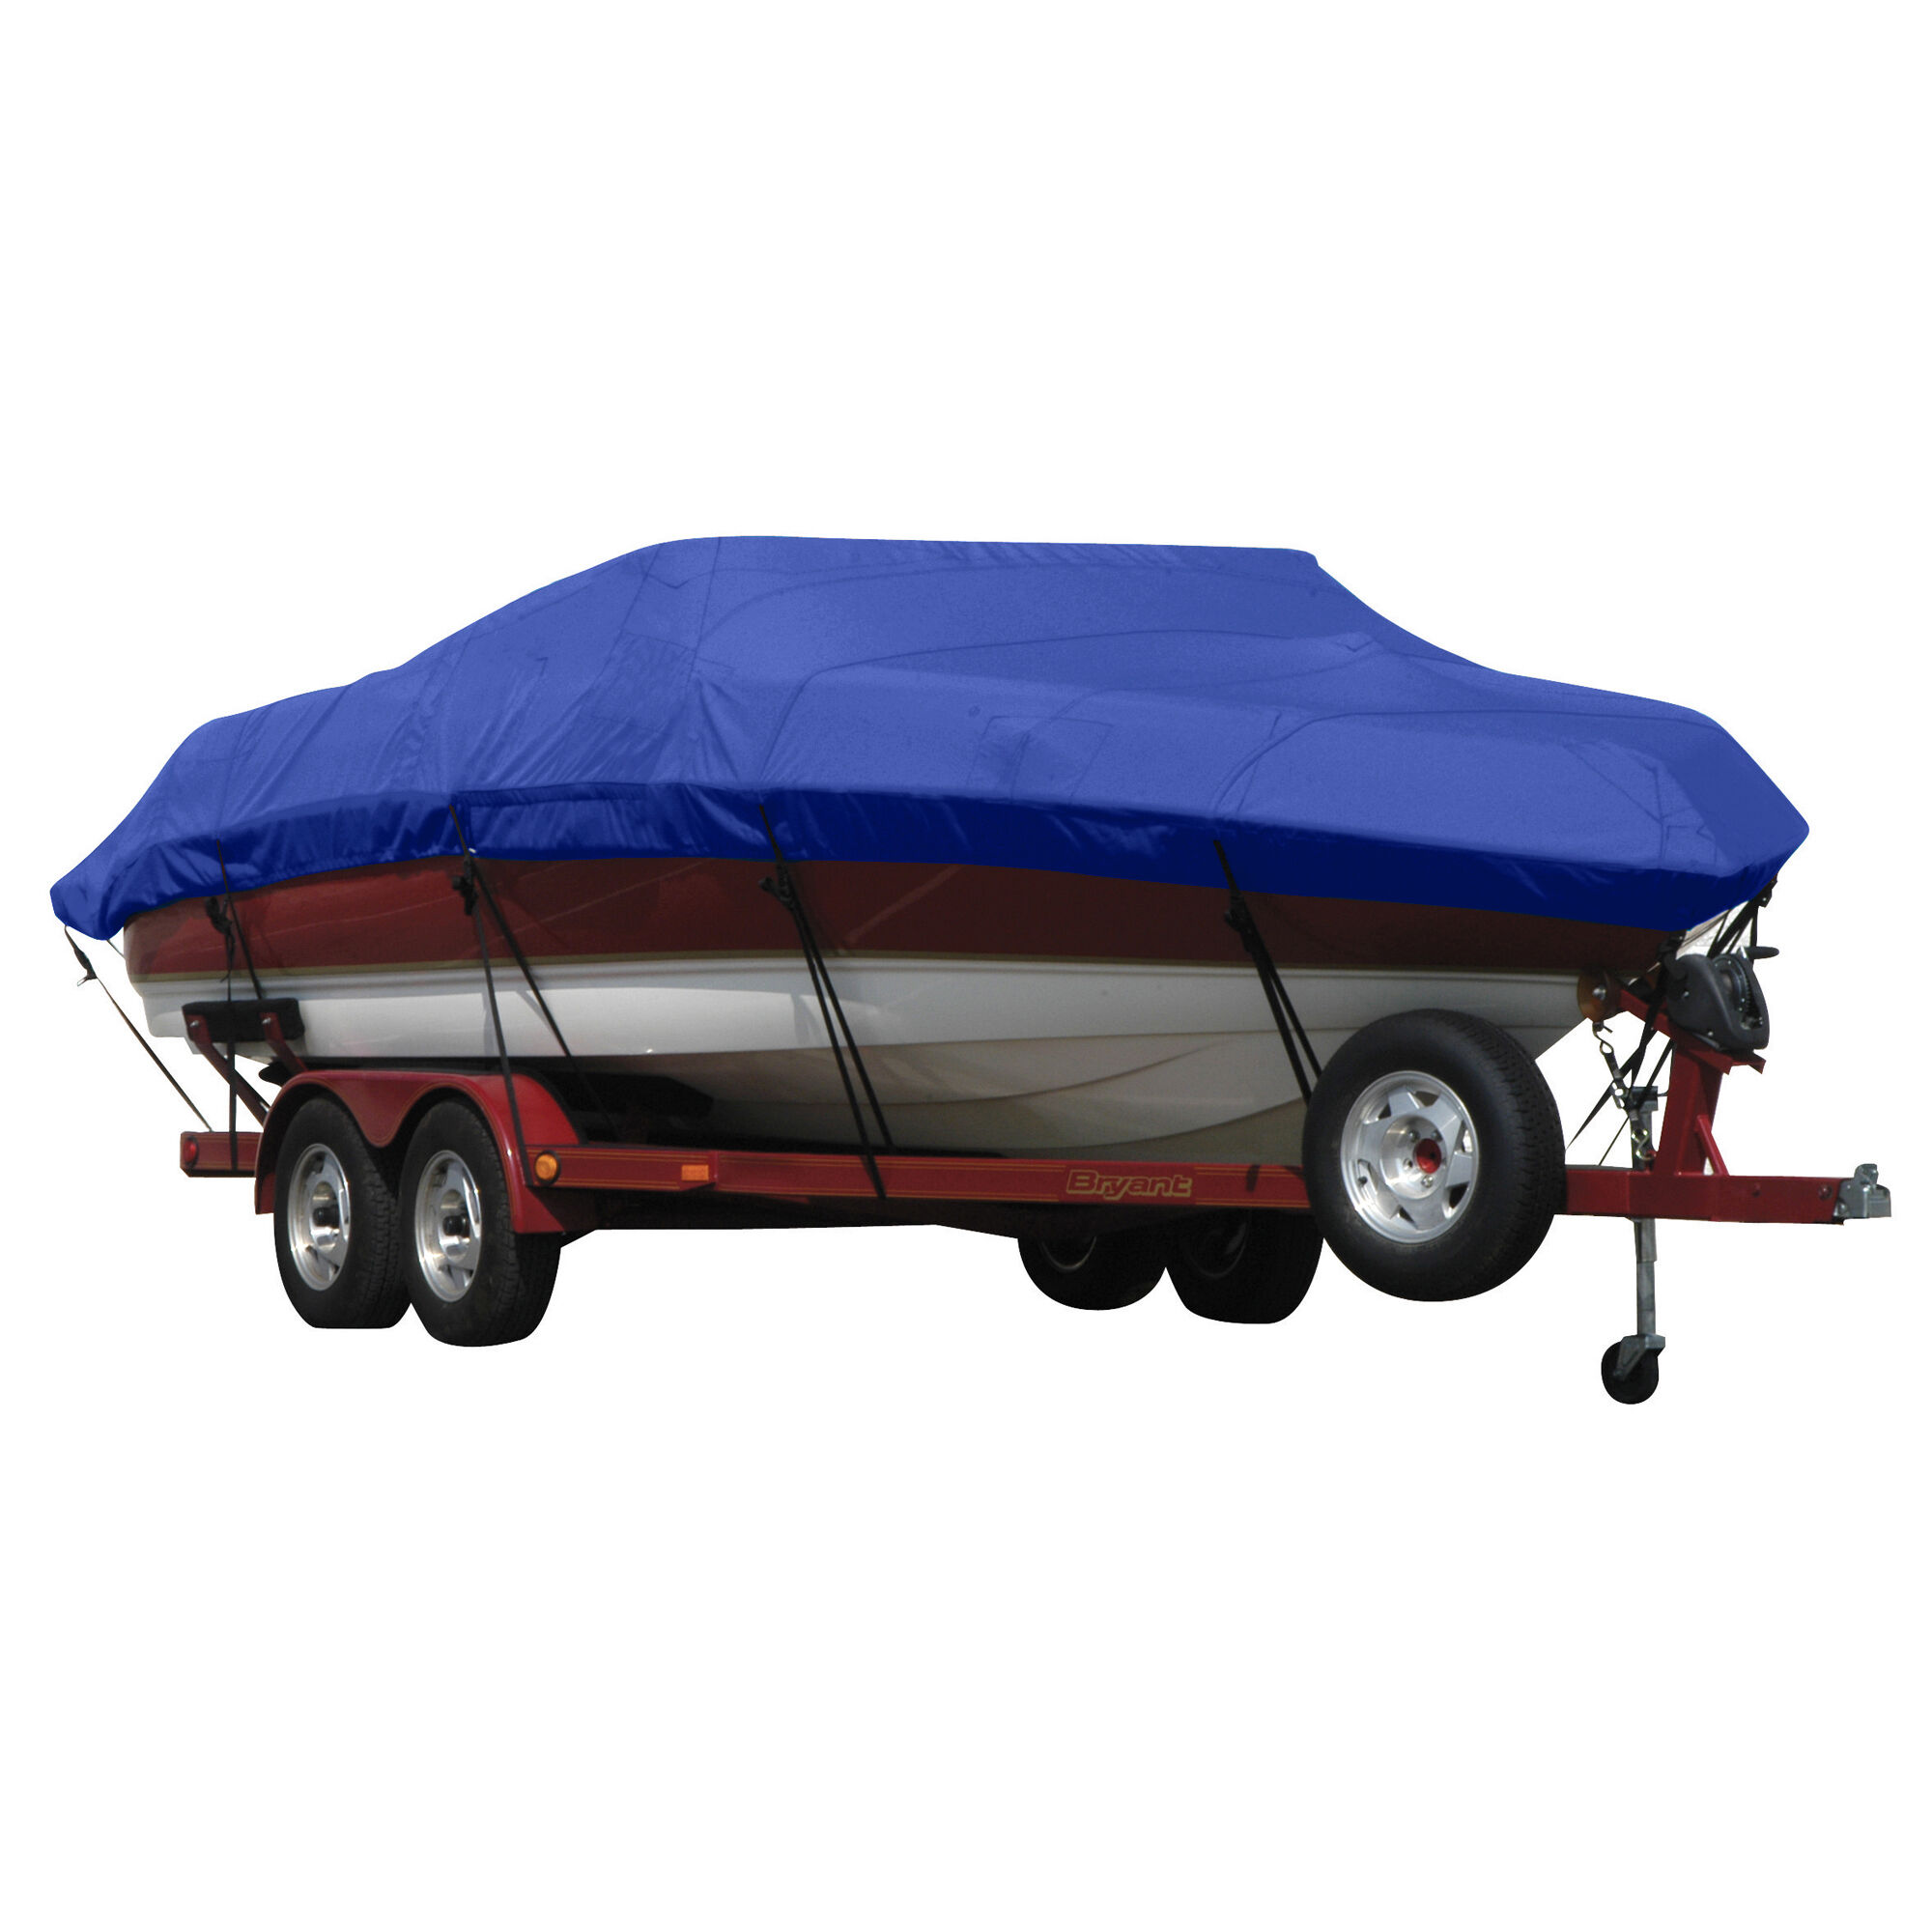 Covermate Exact Fit Sunbrella Boat Cover for Wellcraft Eclipse 215 Eclipse 215 Does Not Accommodate Bow Rails I/O. Ocean Blue